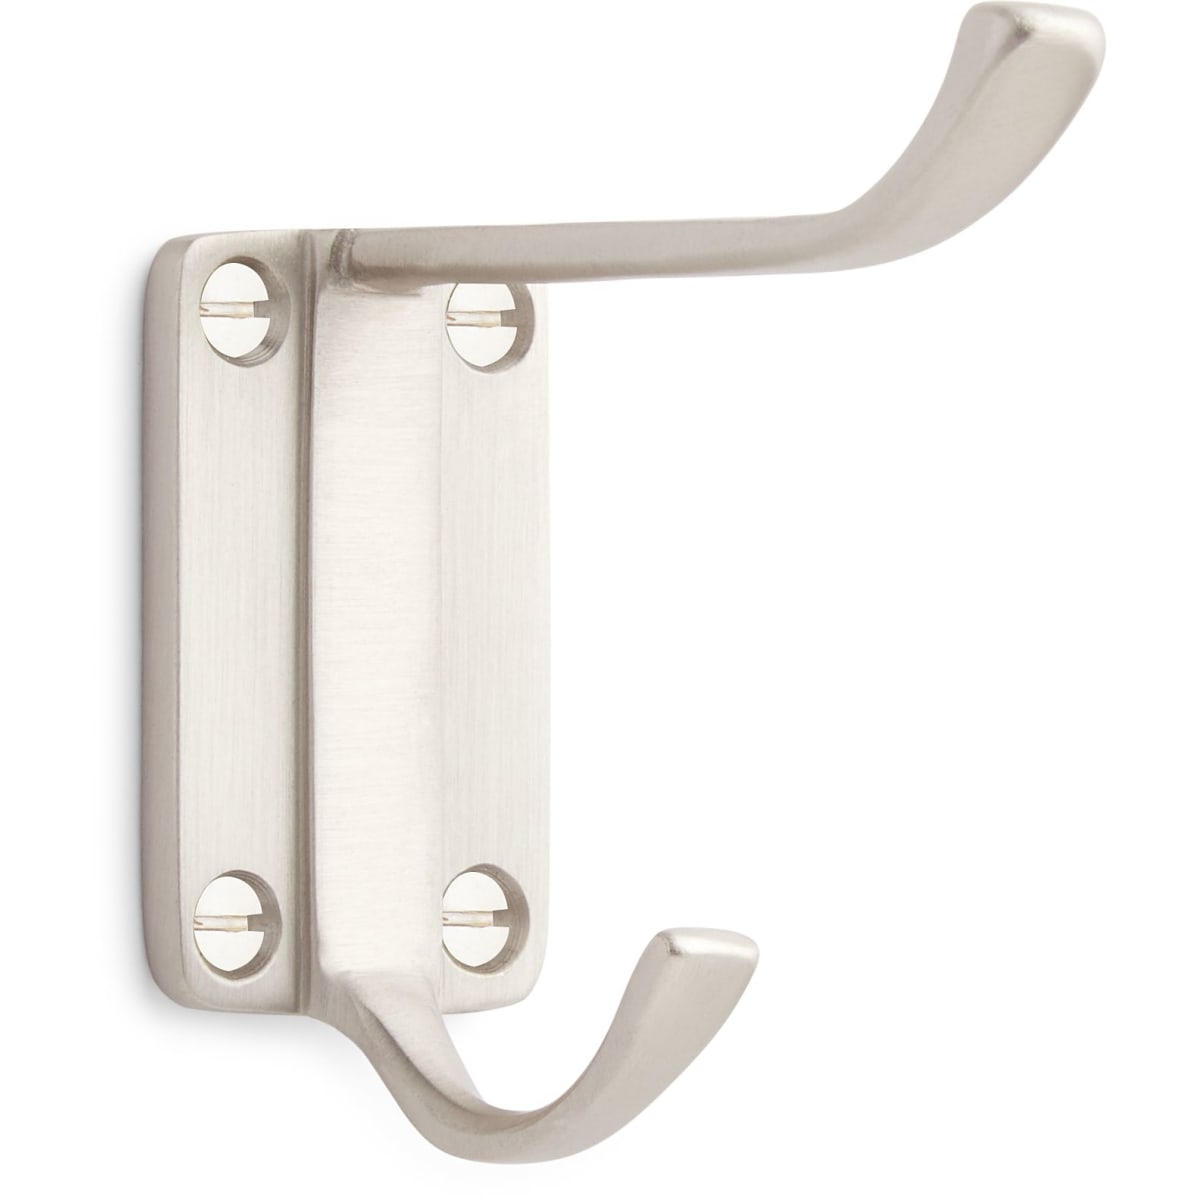 Signature Hardware 351343 Solid Brass Double Coat Hook - Nickel, Silver